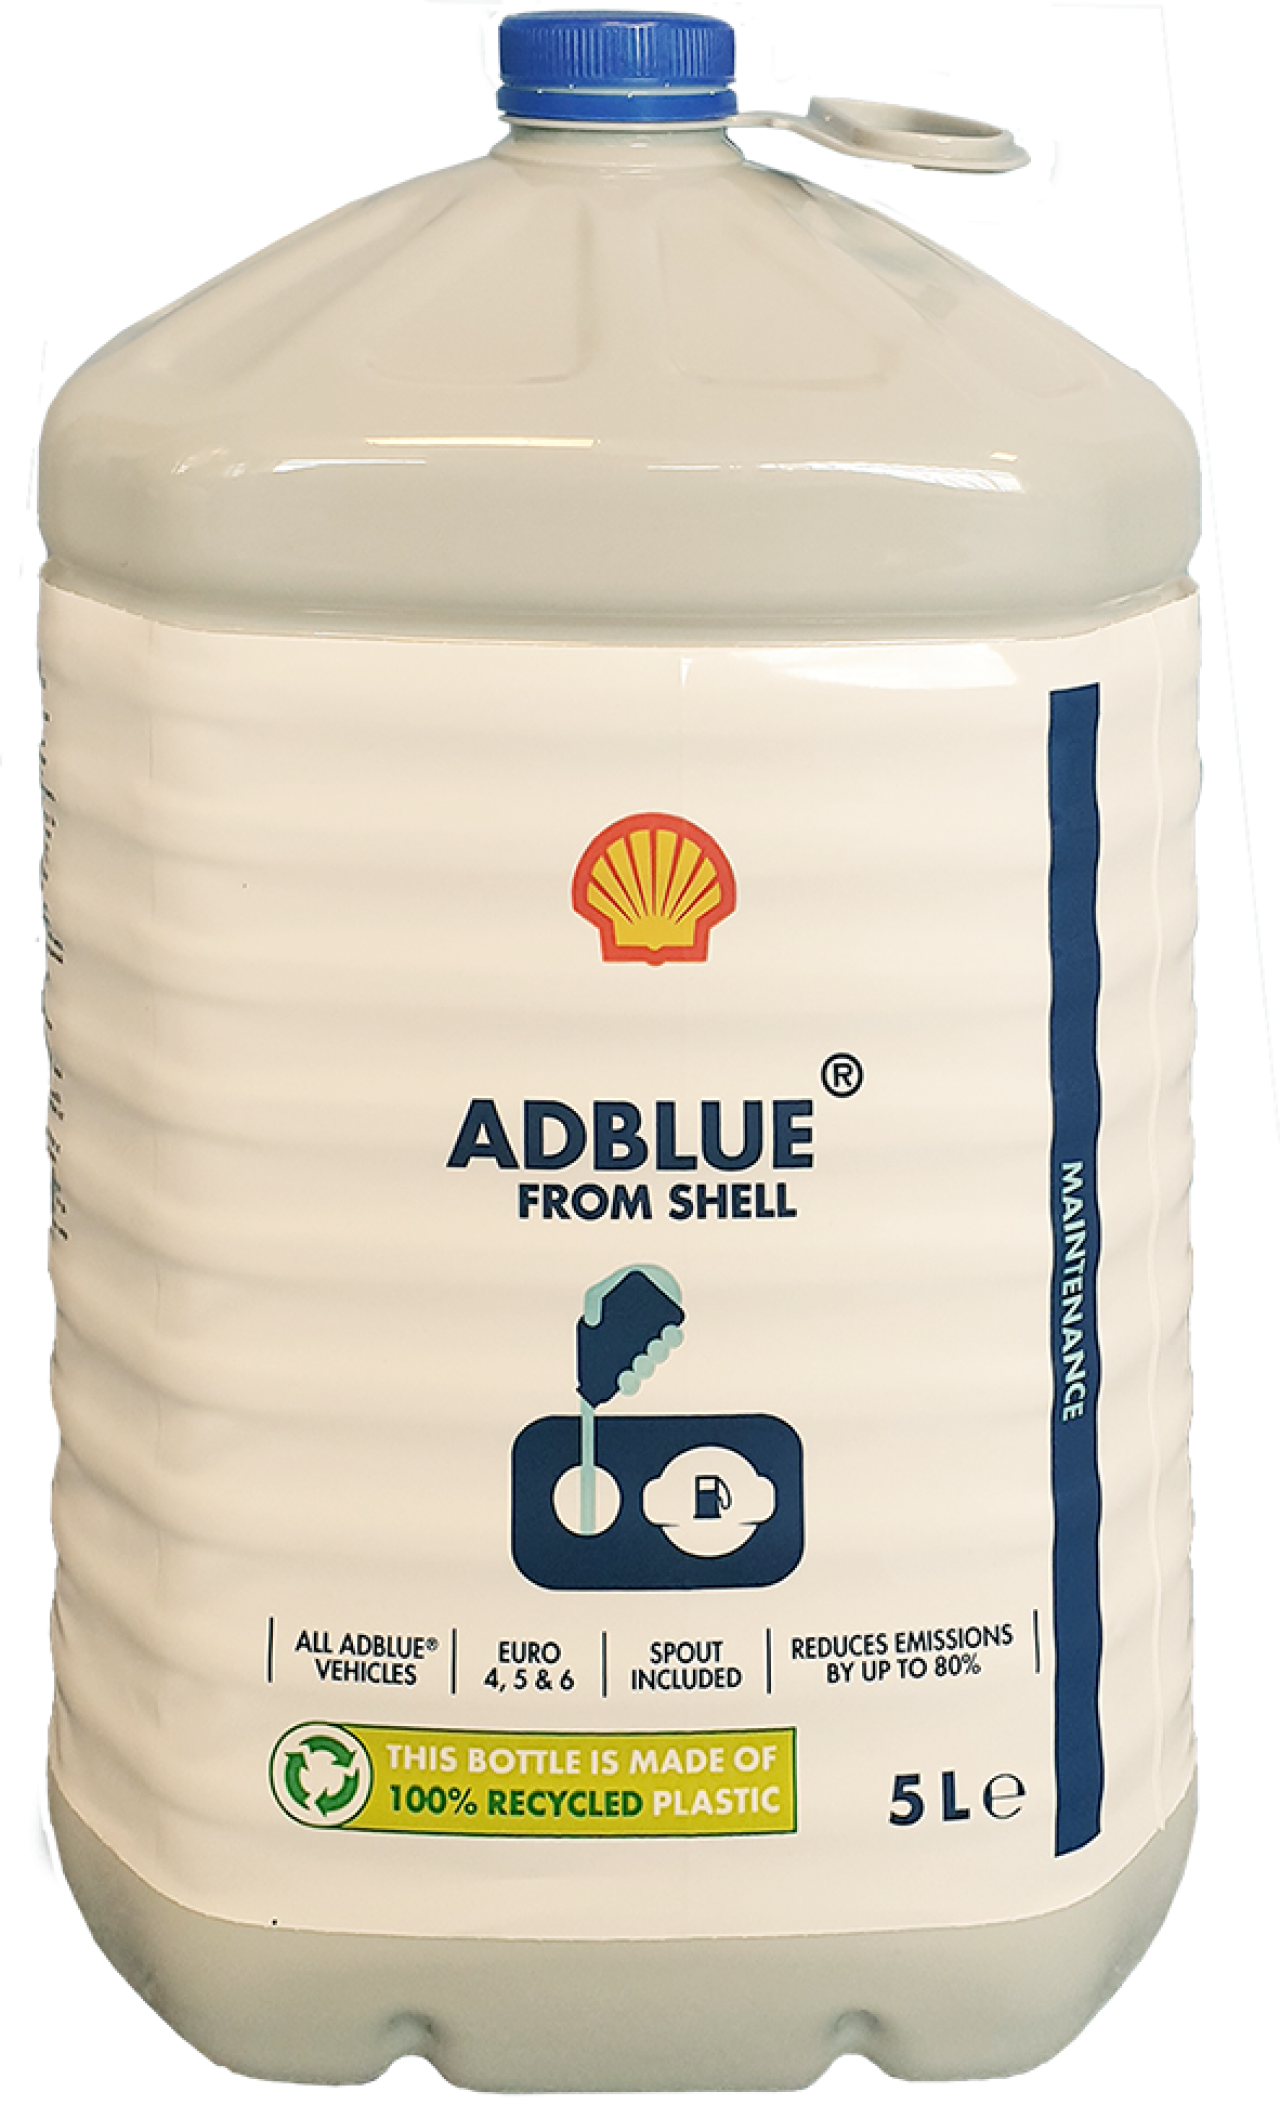 https://shellcarcareproducts.com/images/products/adblue-shell-5l-1.png?resolution=1280x0&quality=85&type=webp&background=FFFFFFFF